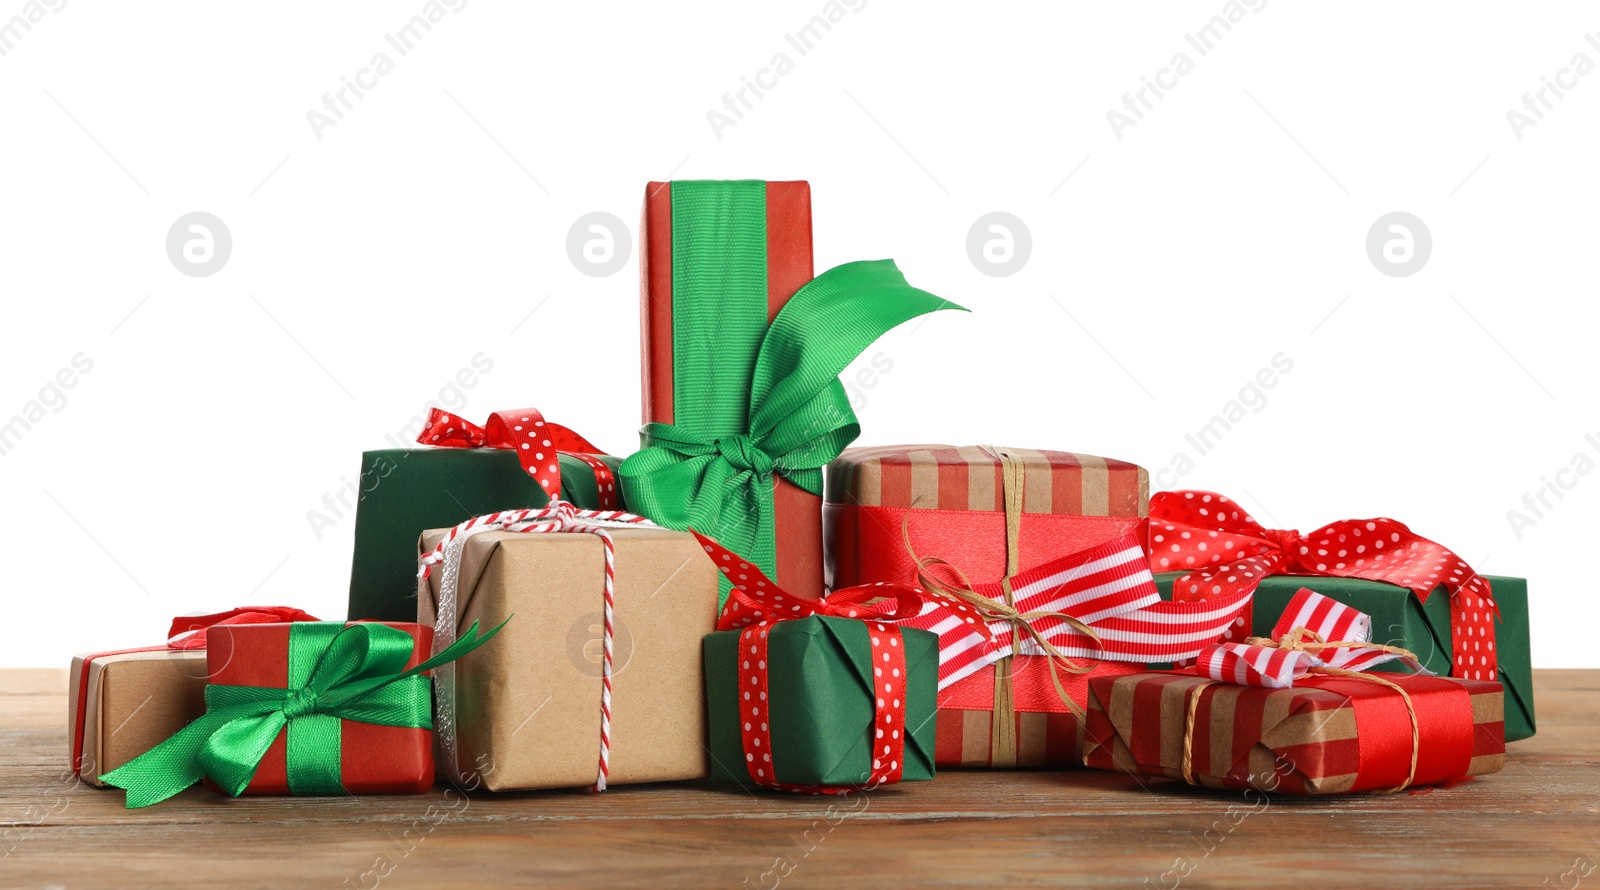 Photo of Many different Christmas gifts on wooden table against white background